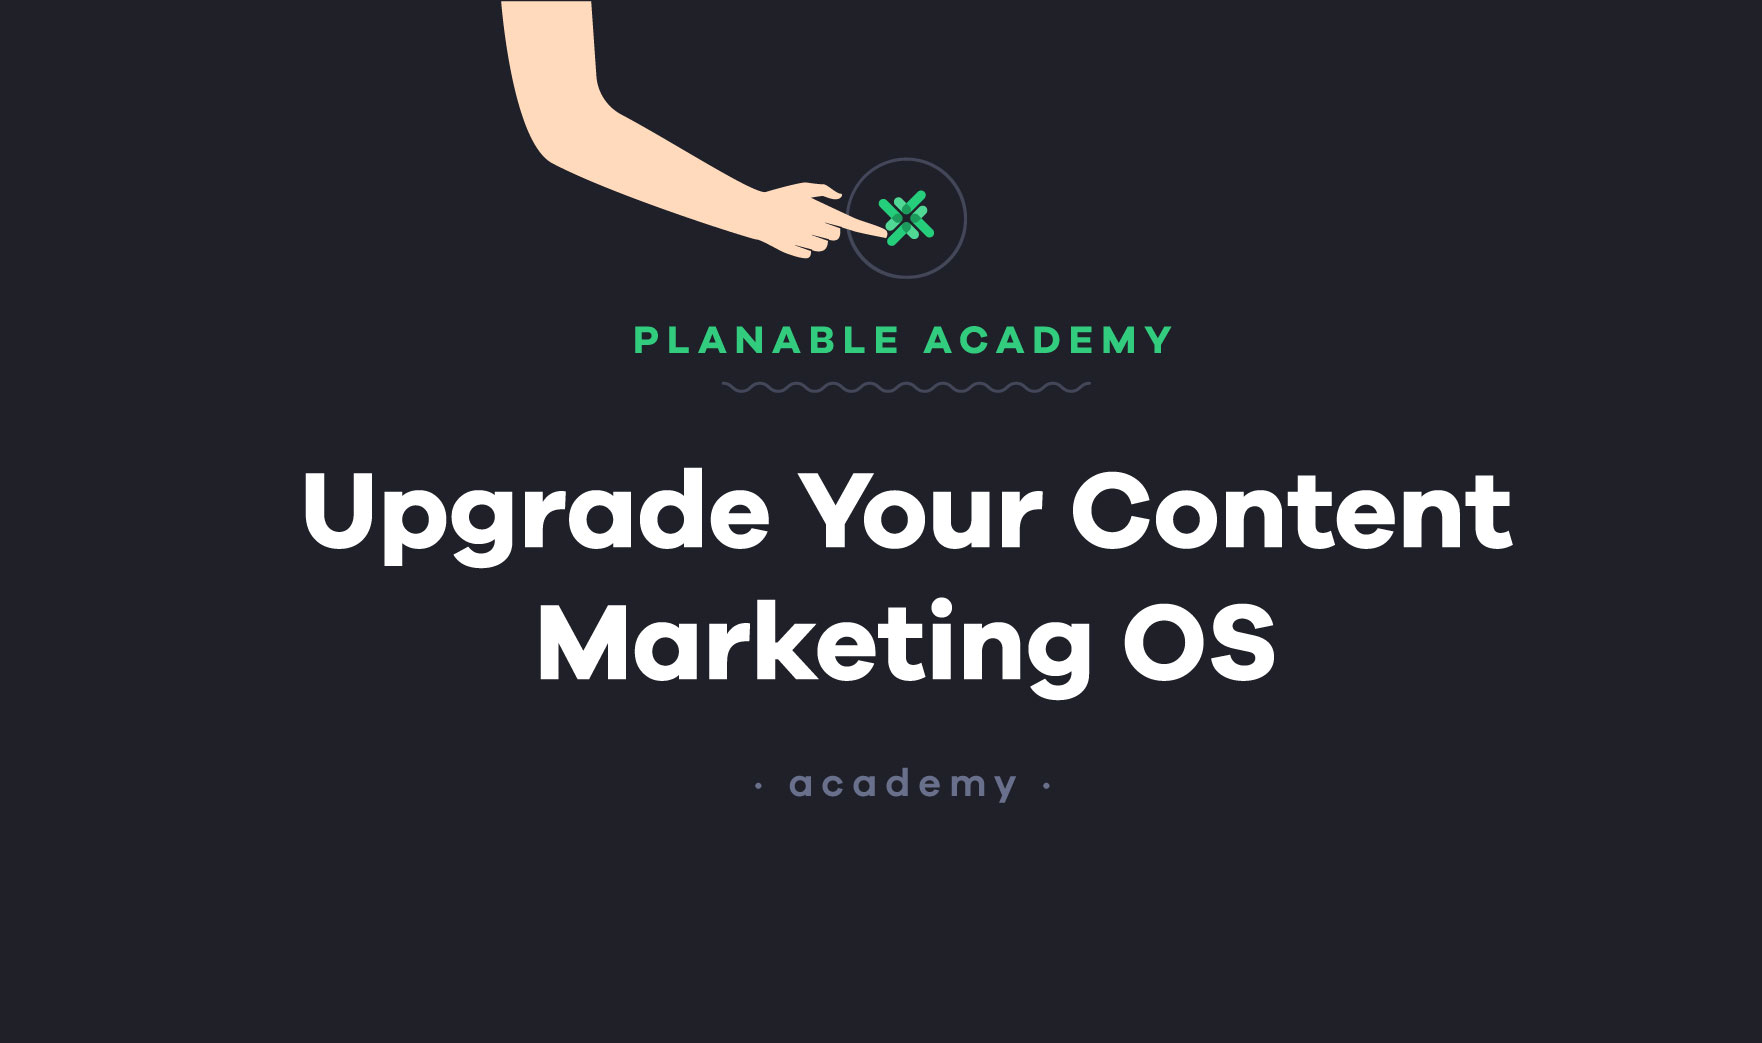 https://planable.io/academy-content-marketing-os/